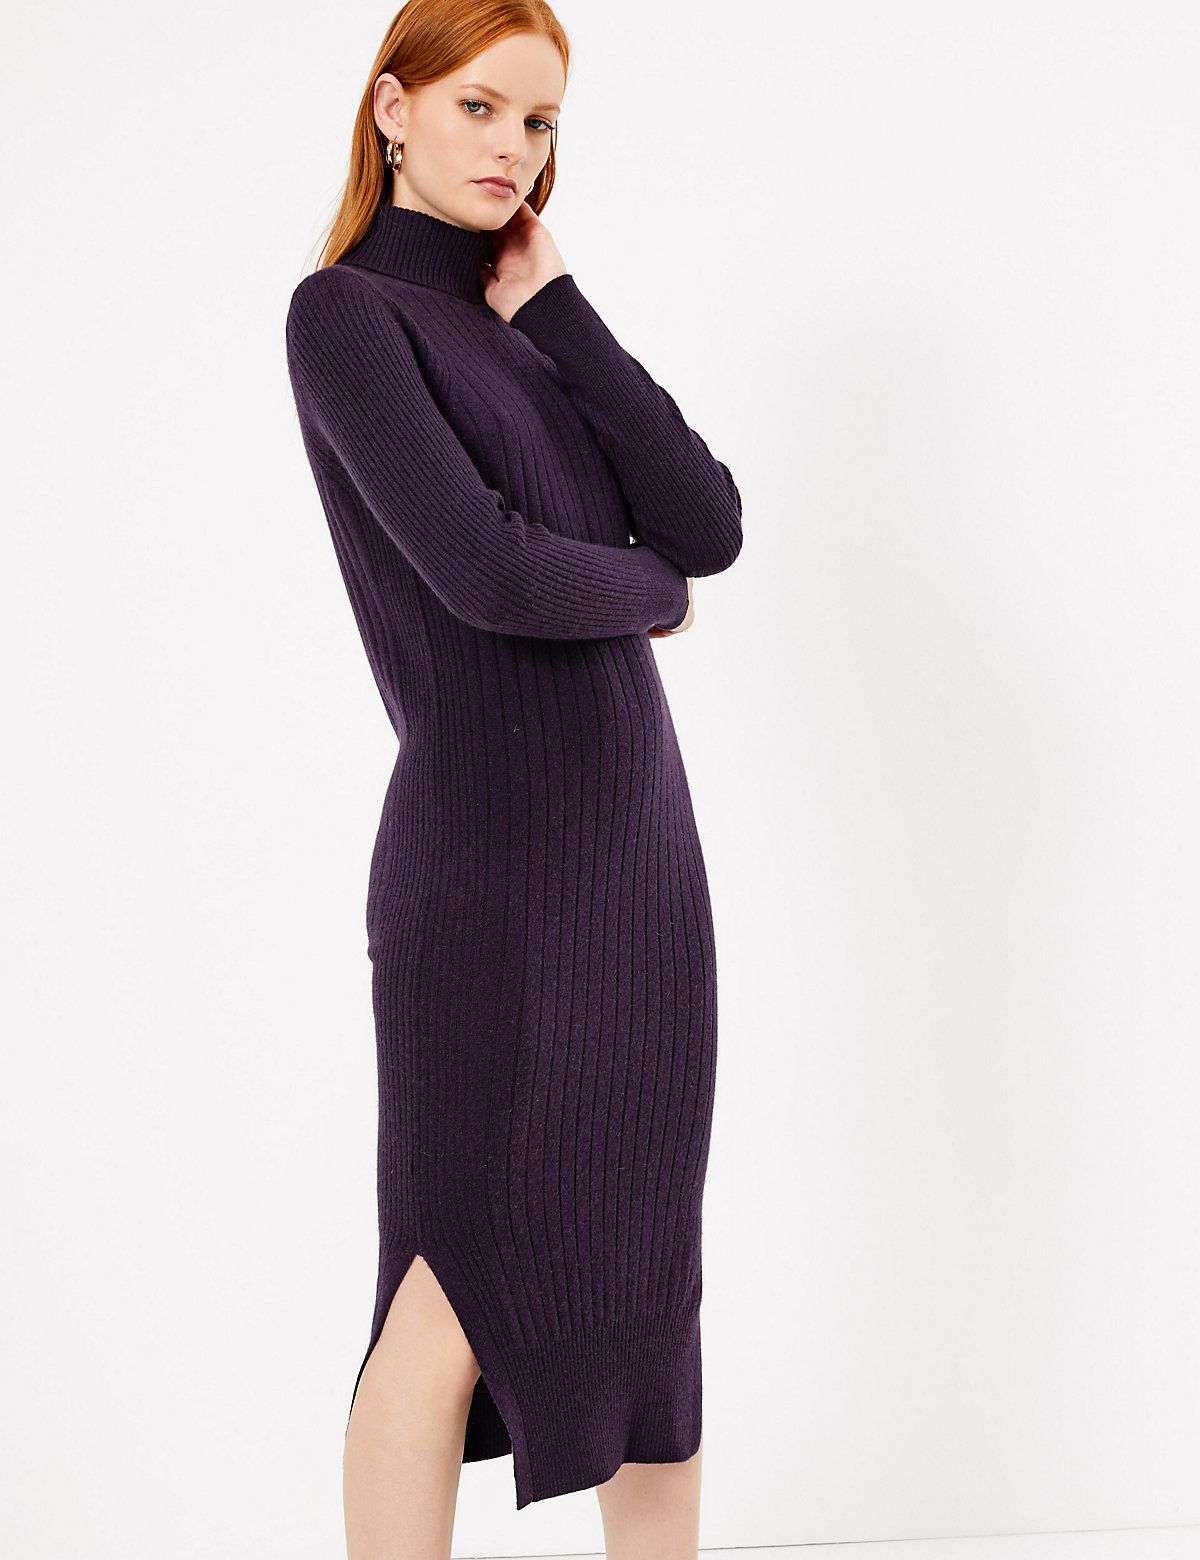 Buy > knitted dress marks and spencer > in stock